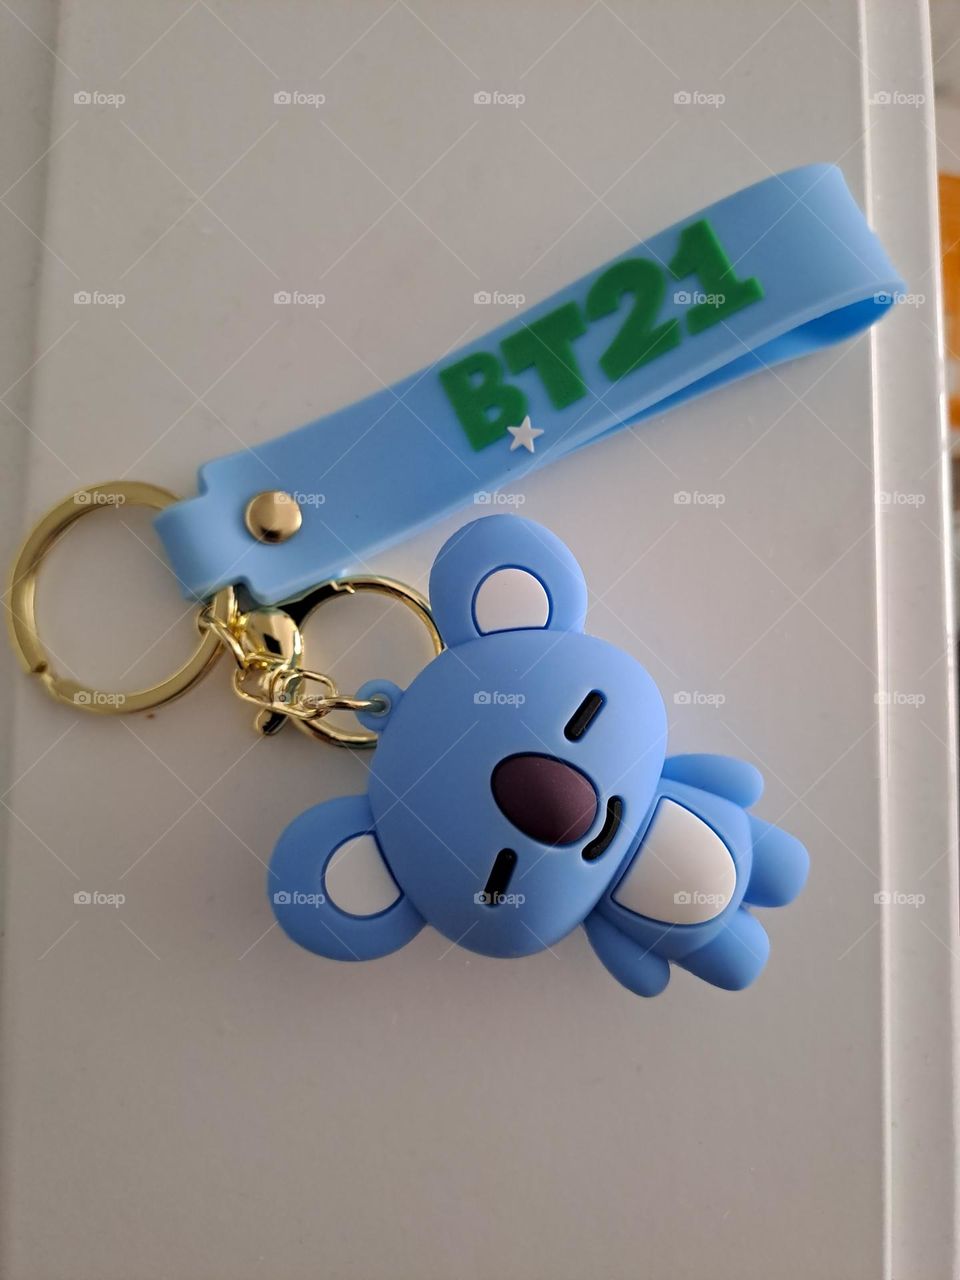 Koya represent RM in BT21. I love BTS 💜💜💜 Are you ARMY to?